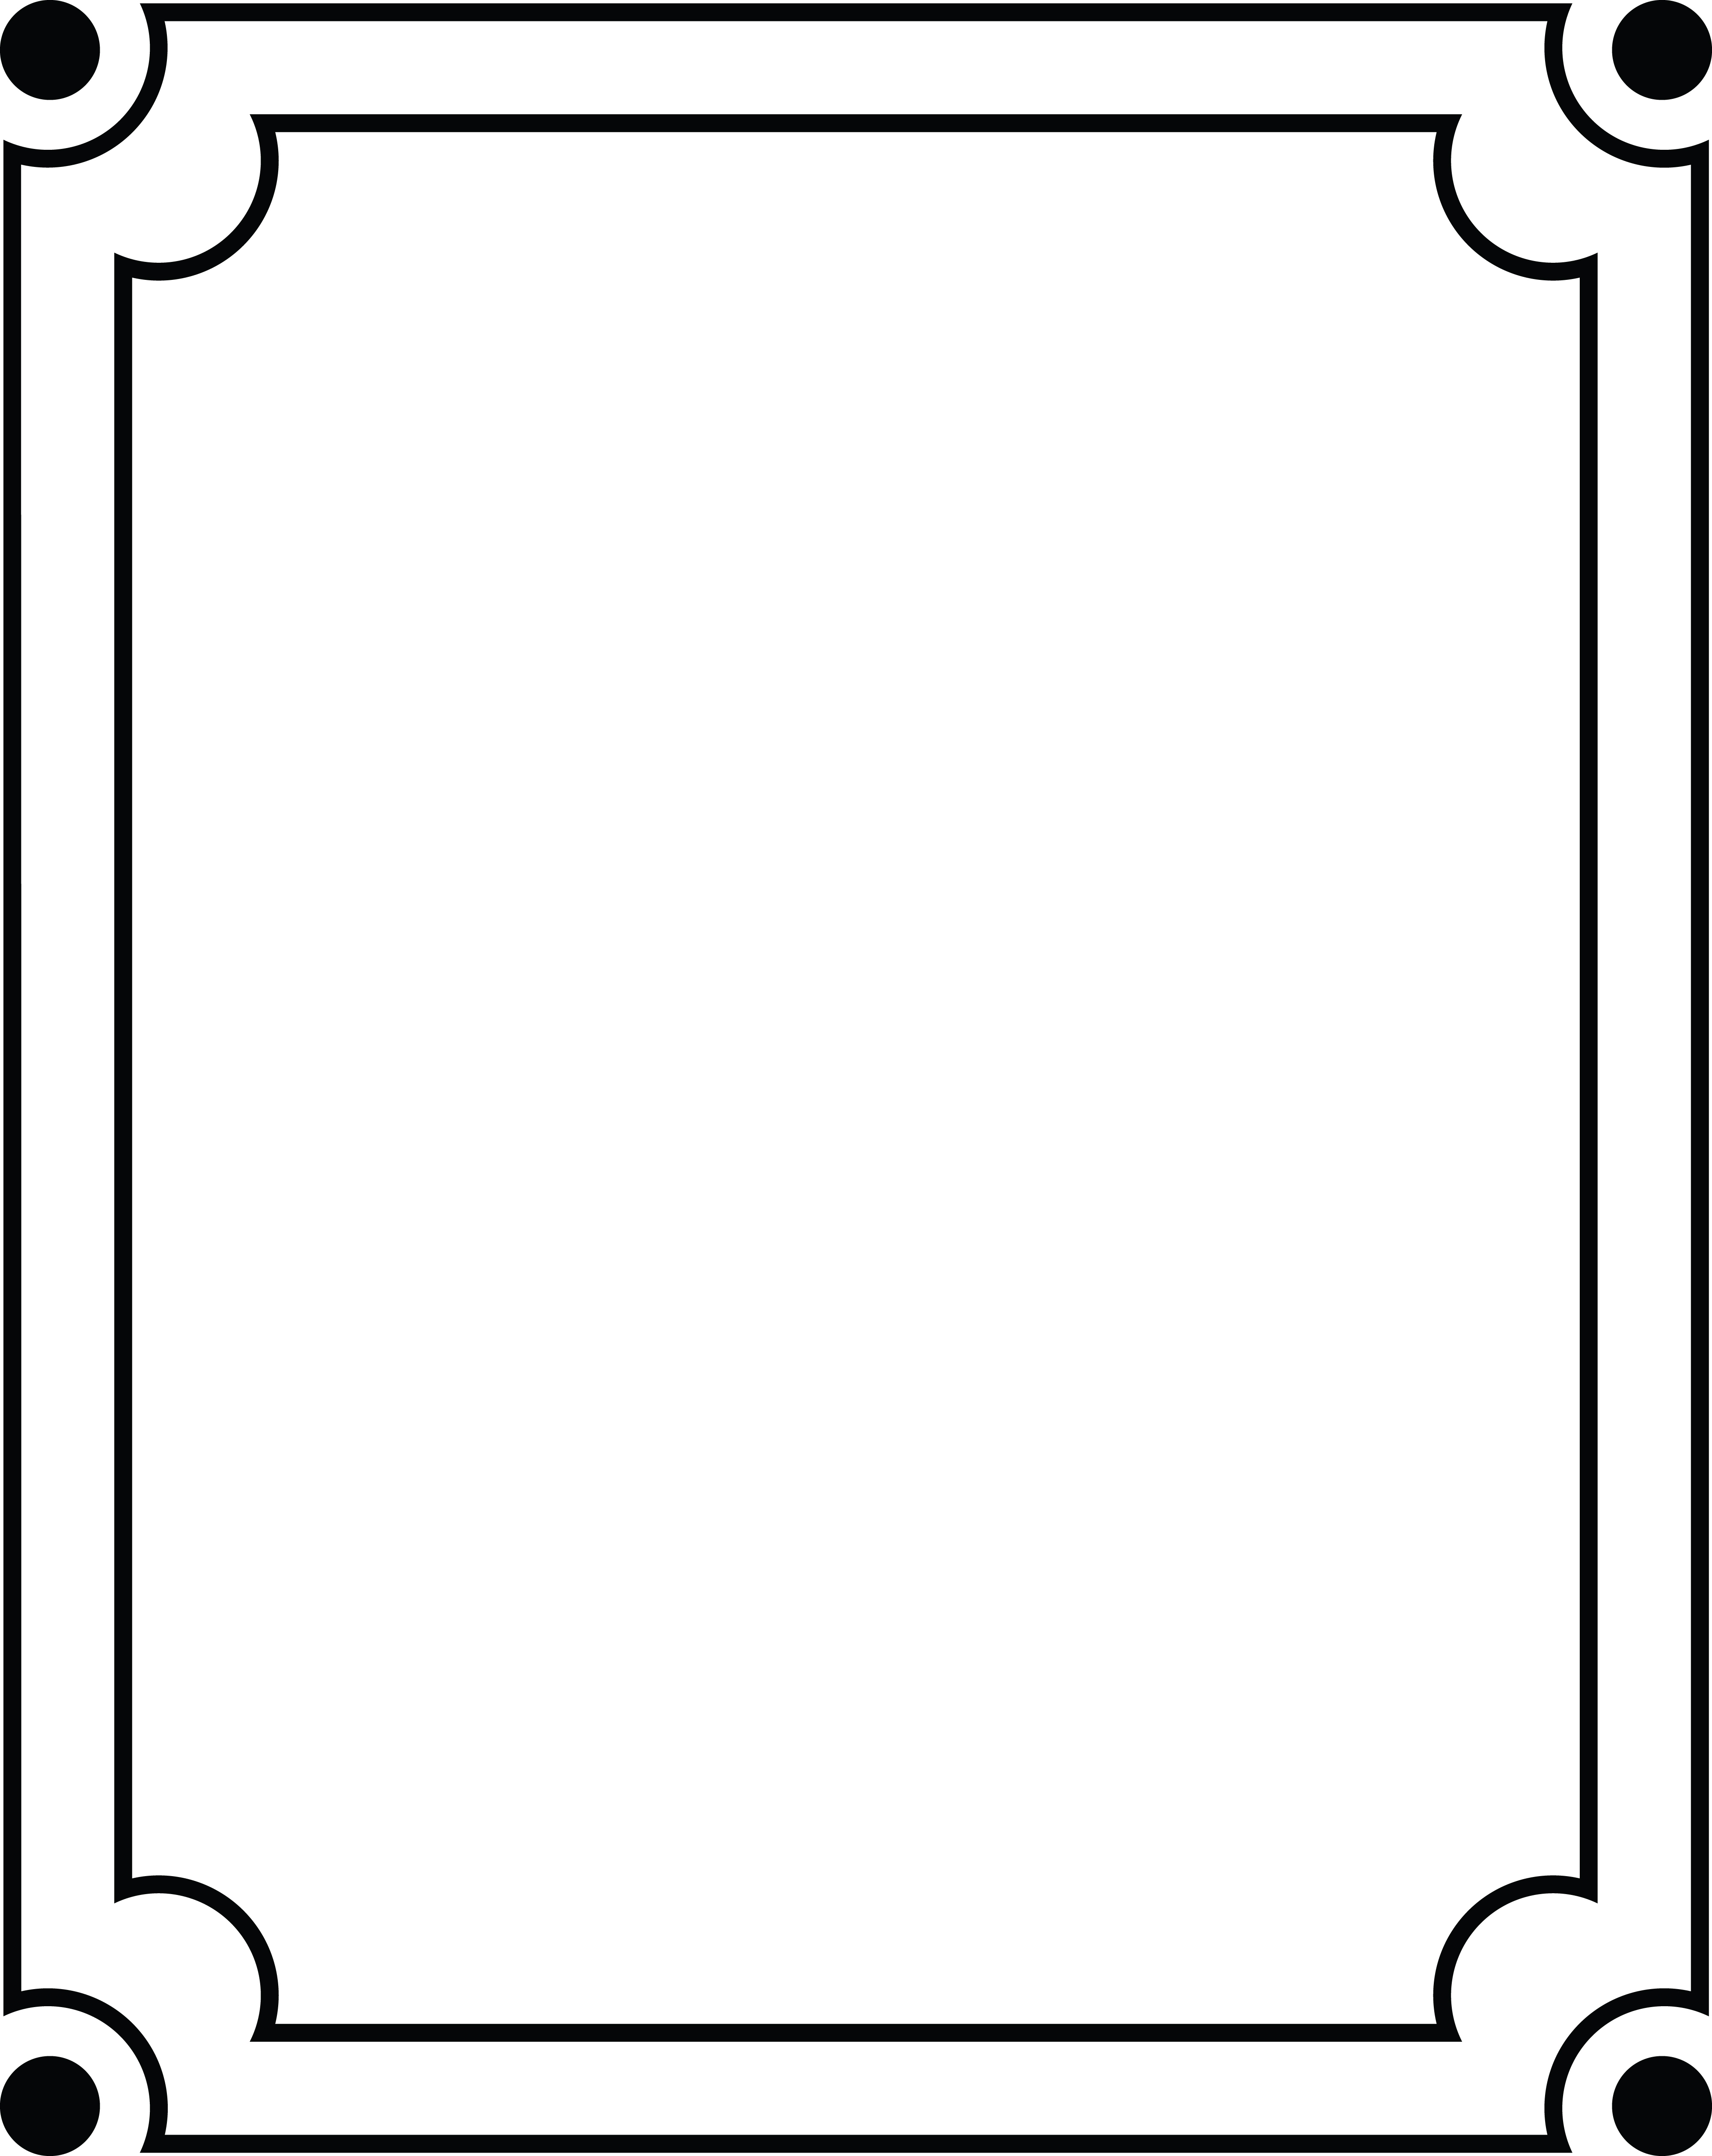 Black And White Frames Clipart - malaysiut